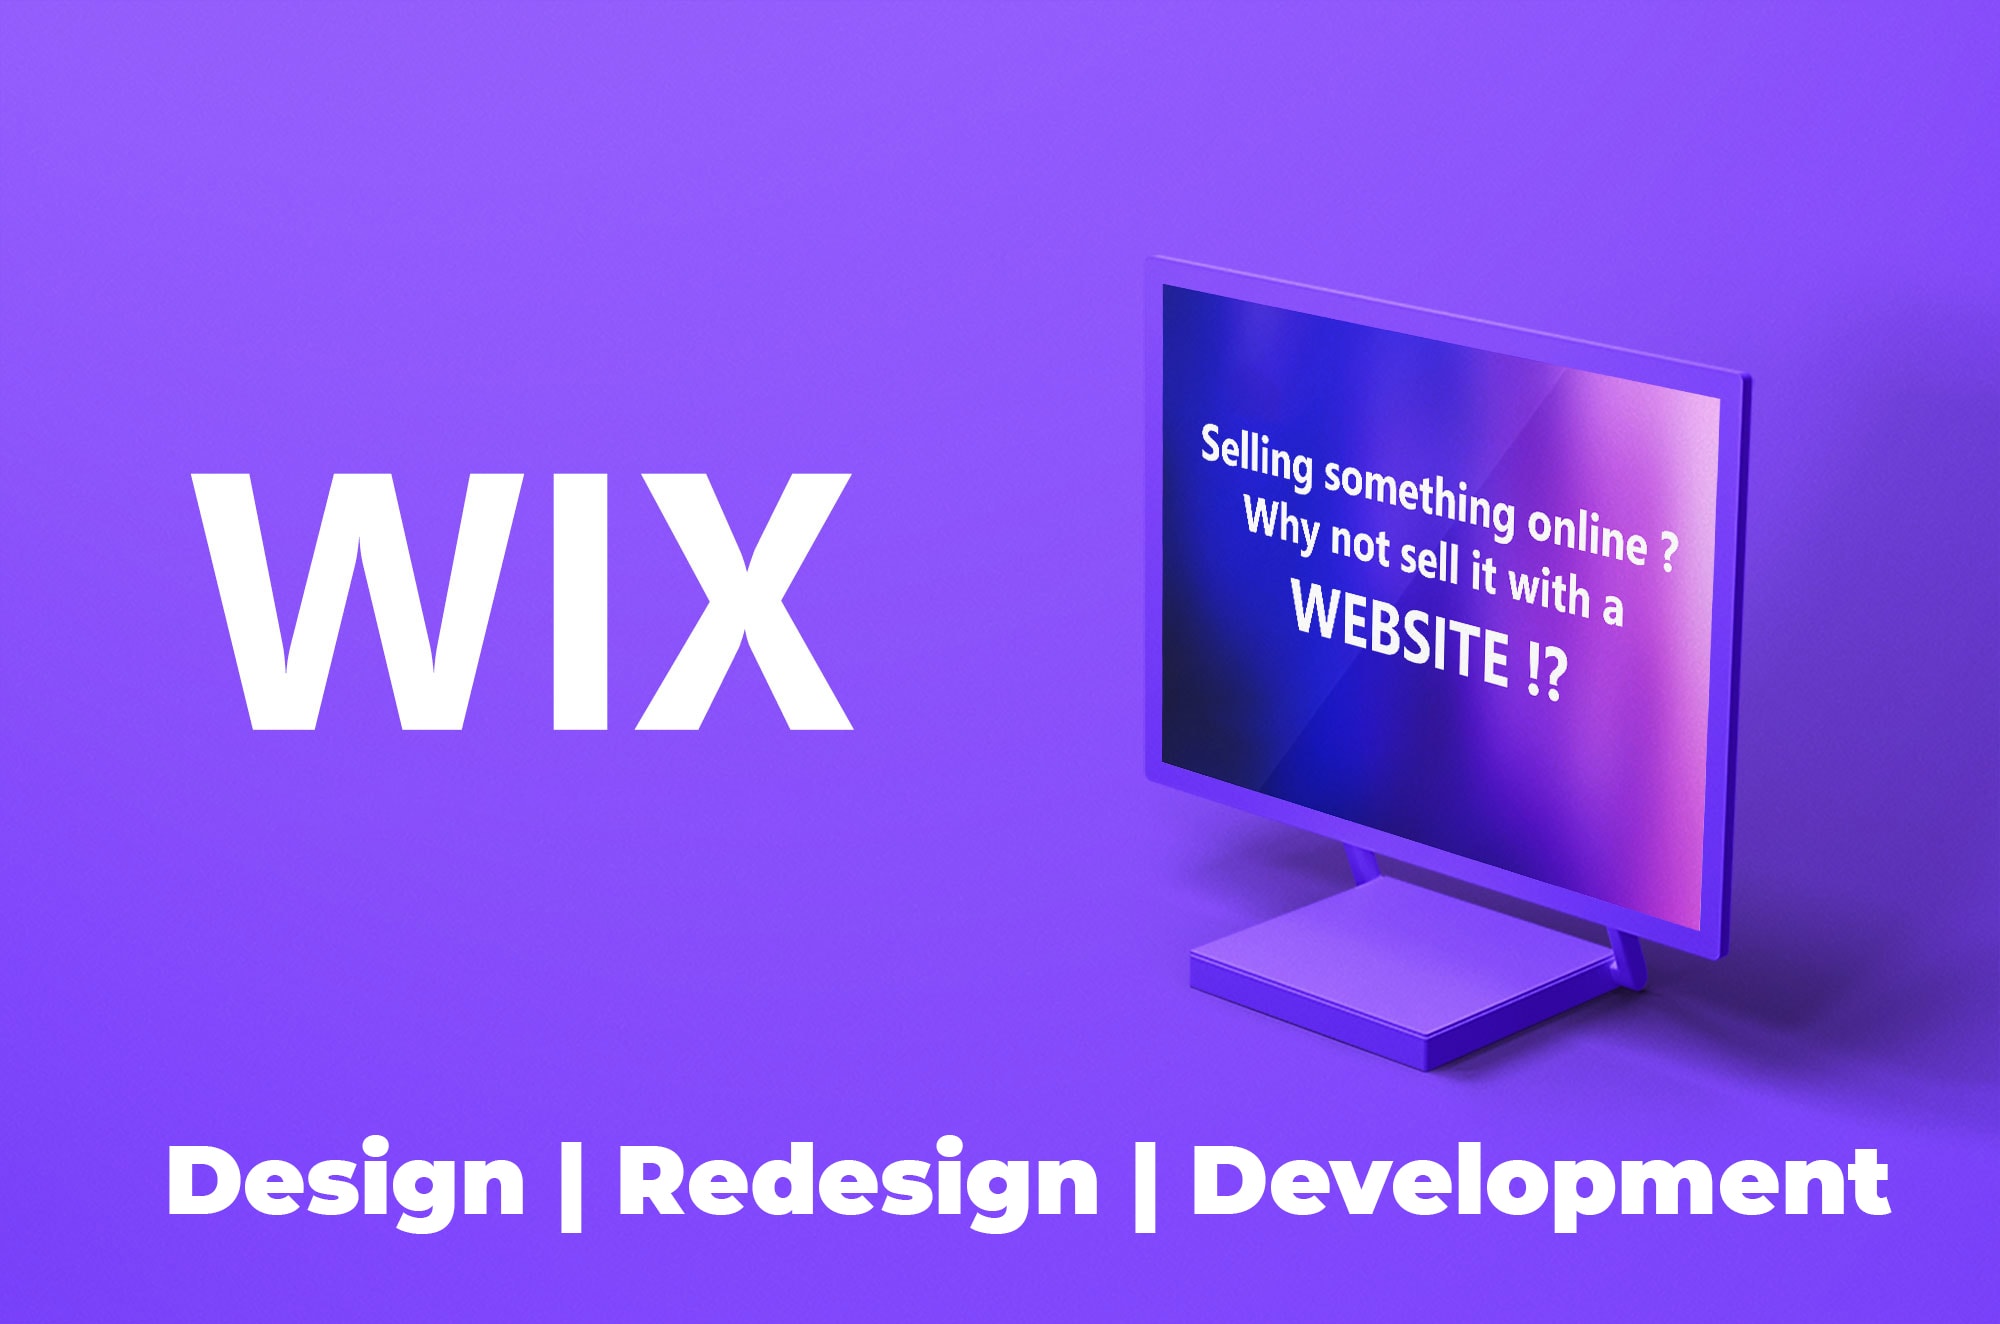 Does Wix leave a watermark?
